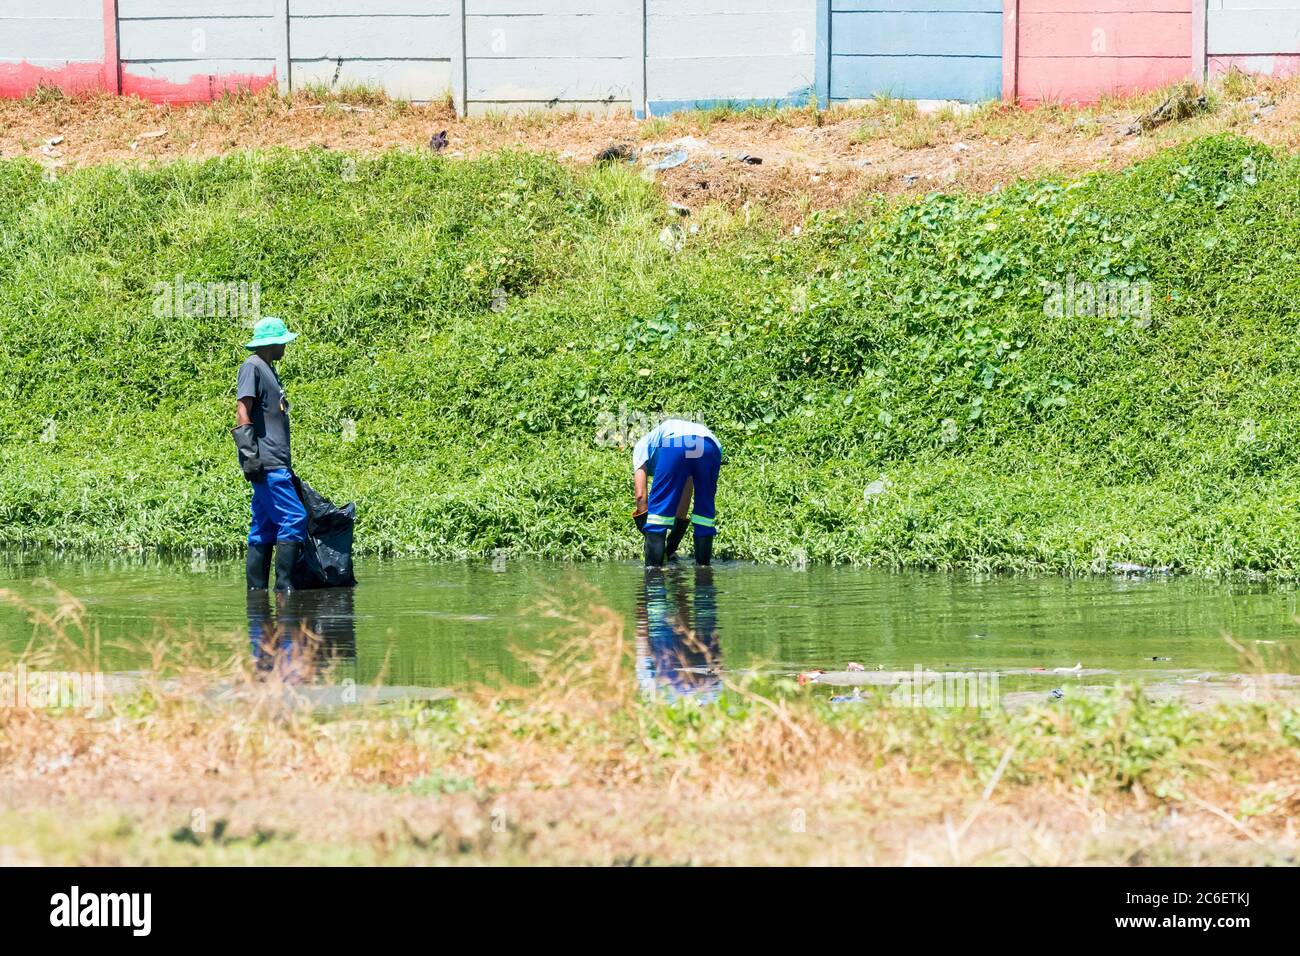 African men or people cleaning a polluted river in Cape Town, South Africa concept environmental awareness and care in Africa Stock Photo